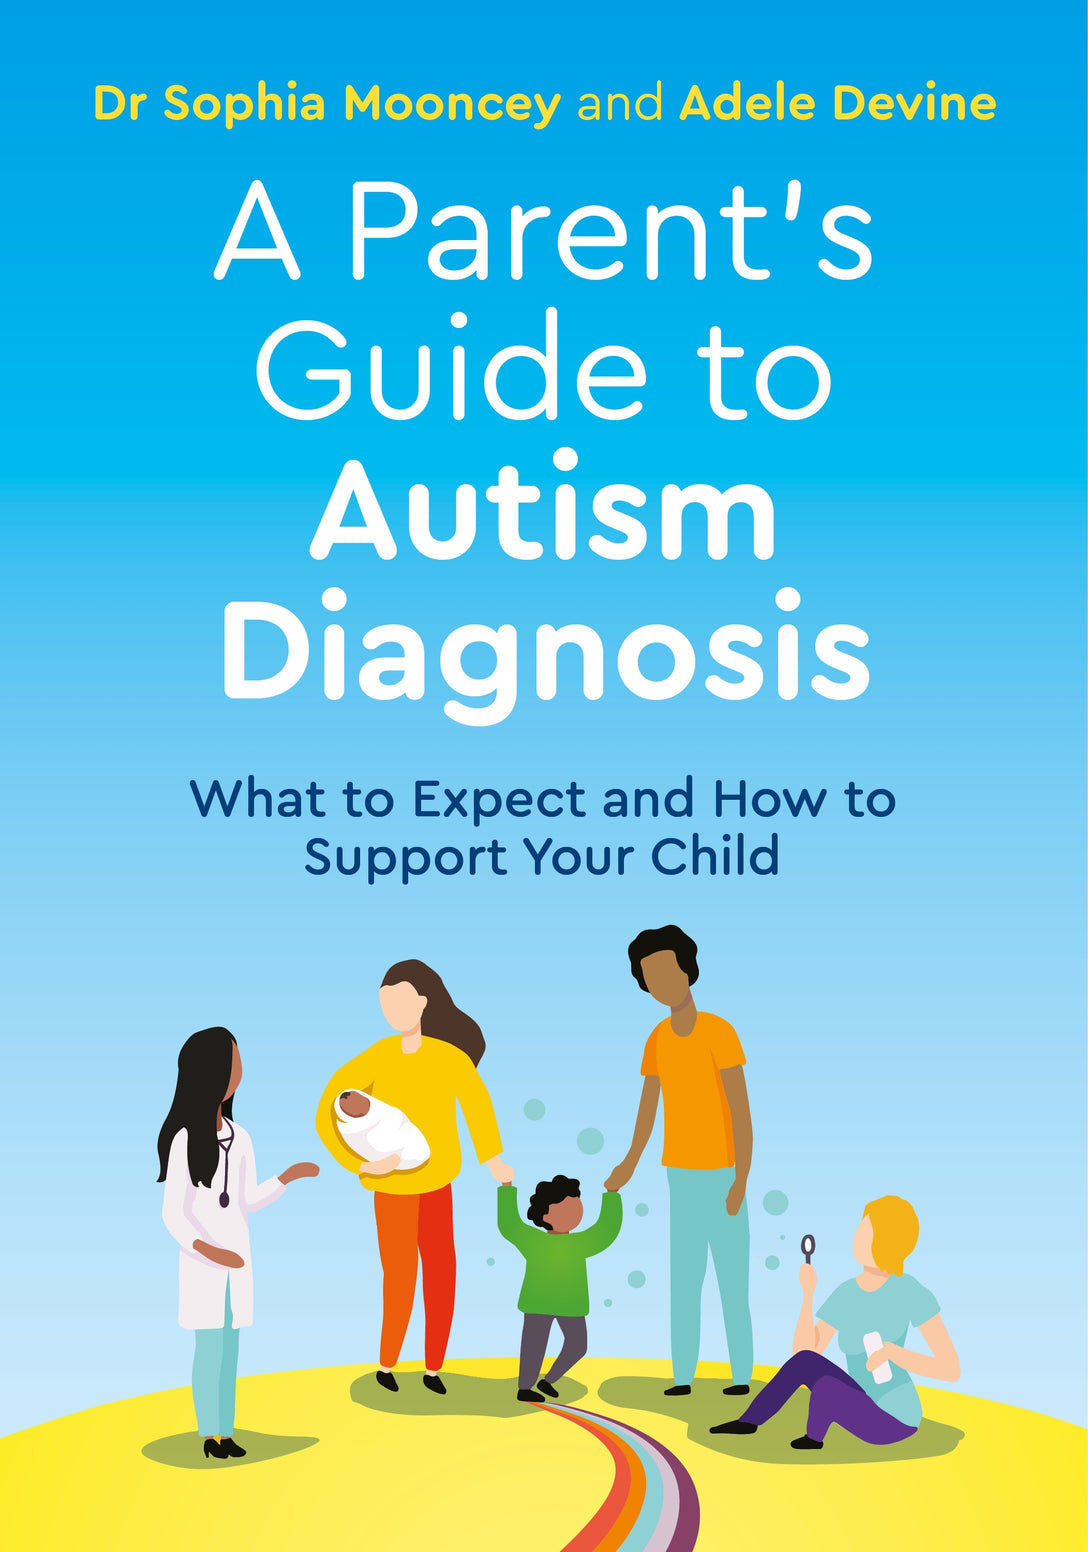 A Parent's Guide to Autism Diagnosis by Adele Devine, Sophia Mooncey